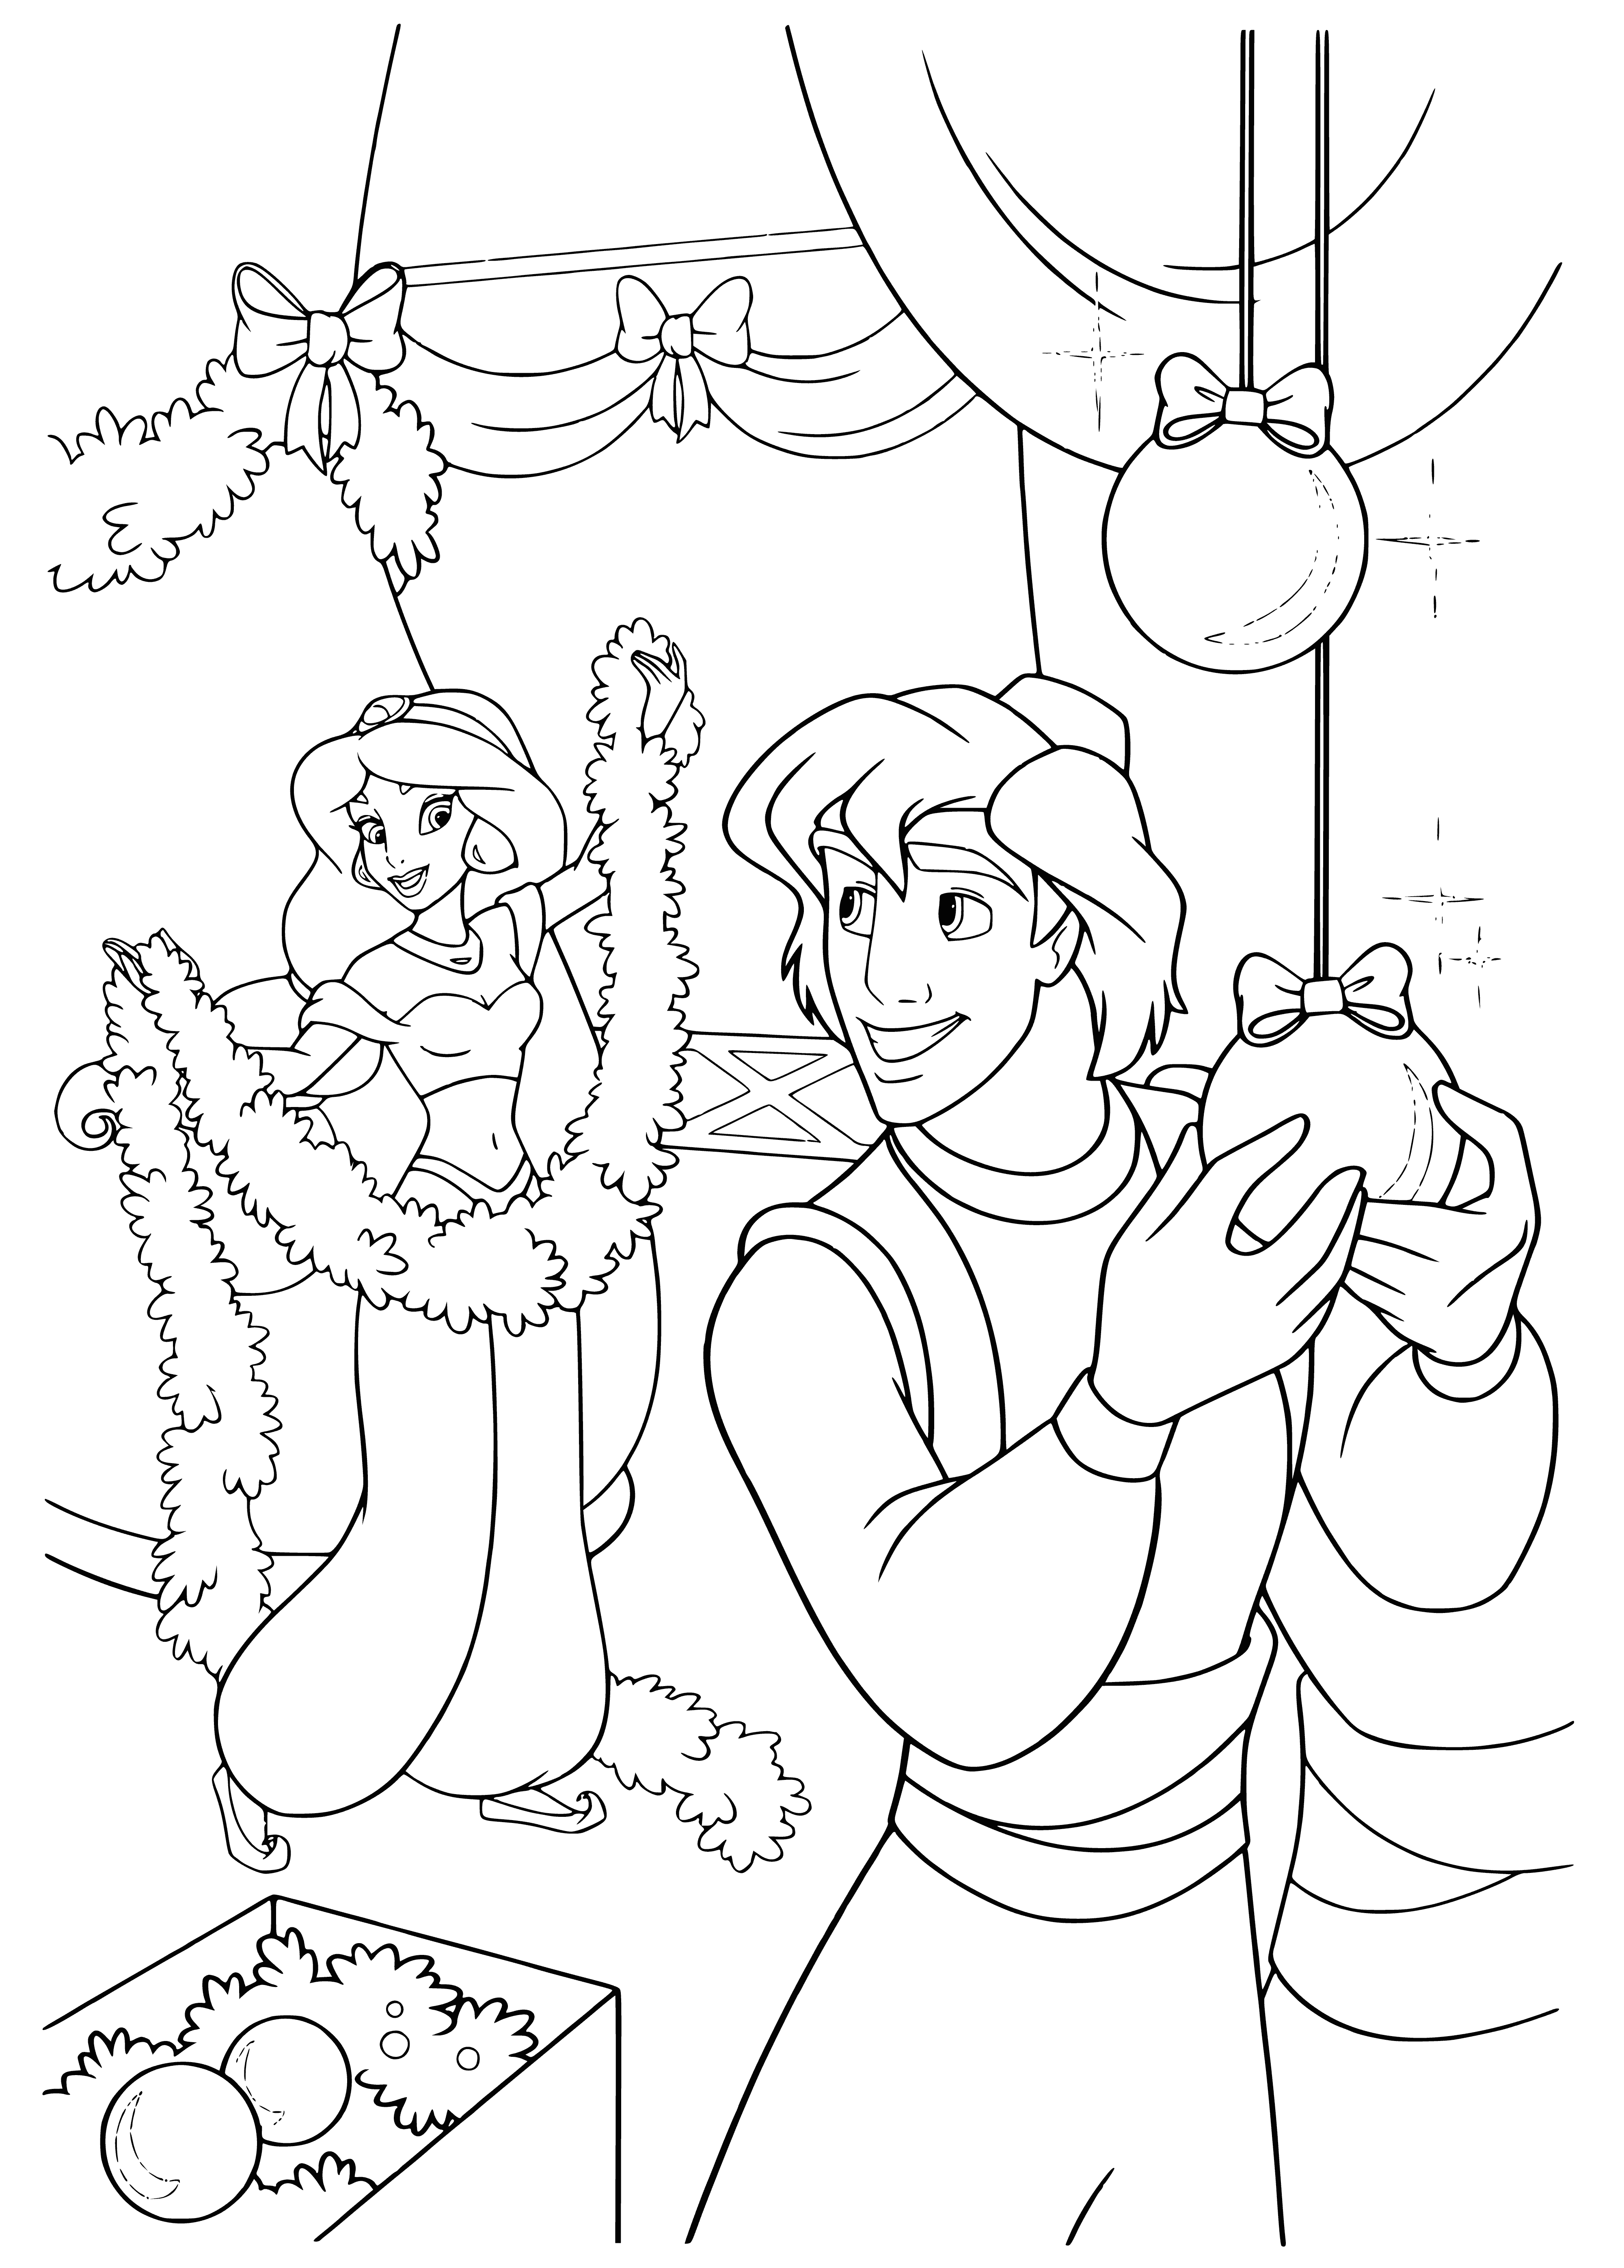 coloring page: Disney princesses celebrate New Year with decorations, all smiles for the start of something special!